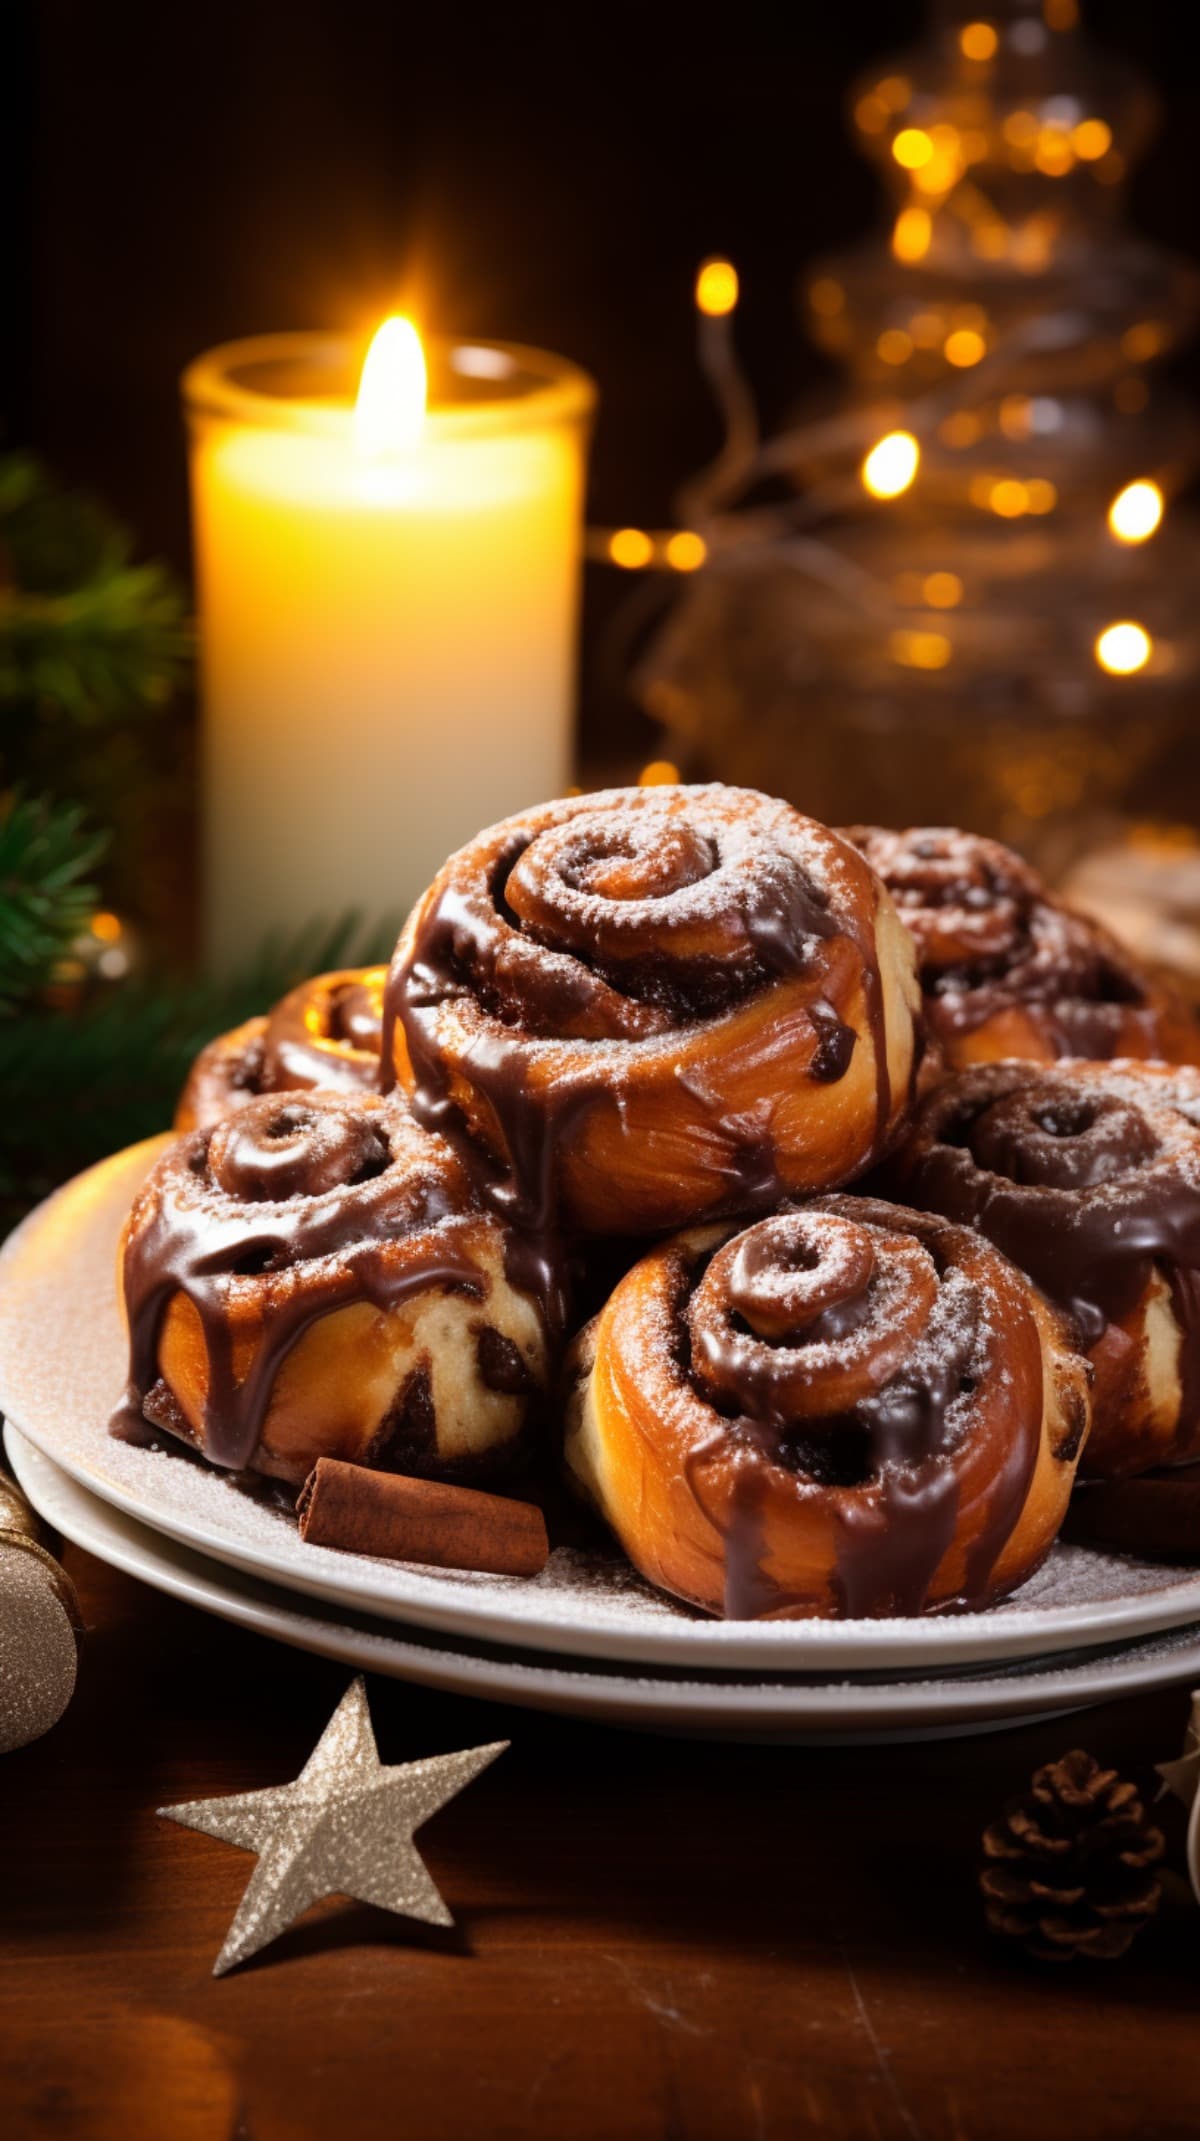 Bunch cinnamon rolls on plate drizzled with chocolate syrup served on holiday table.  